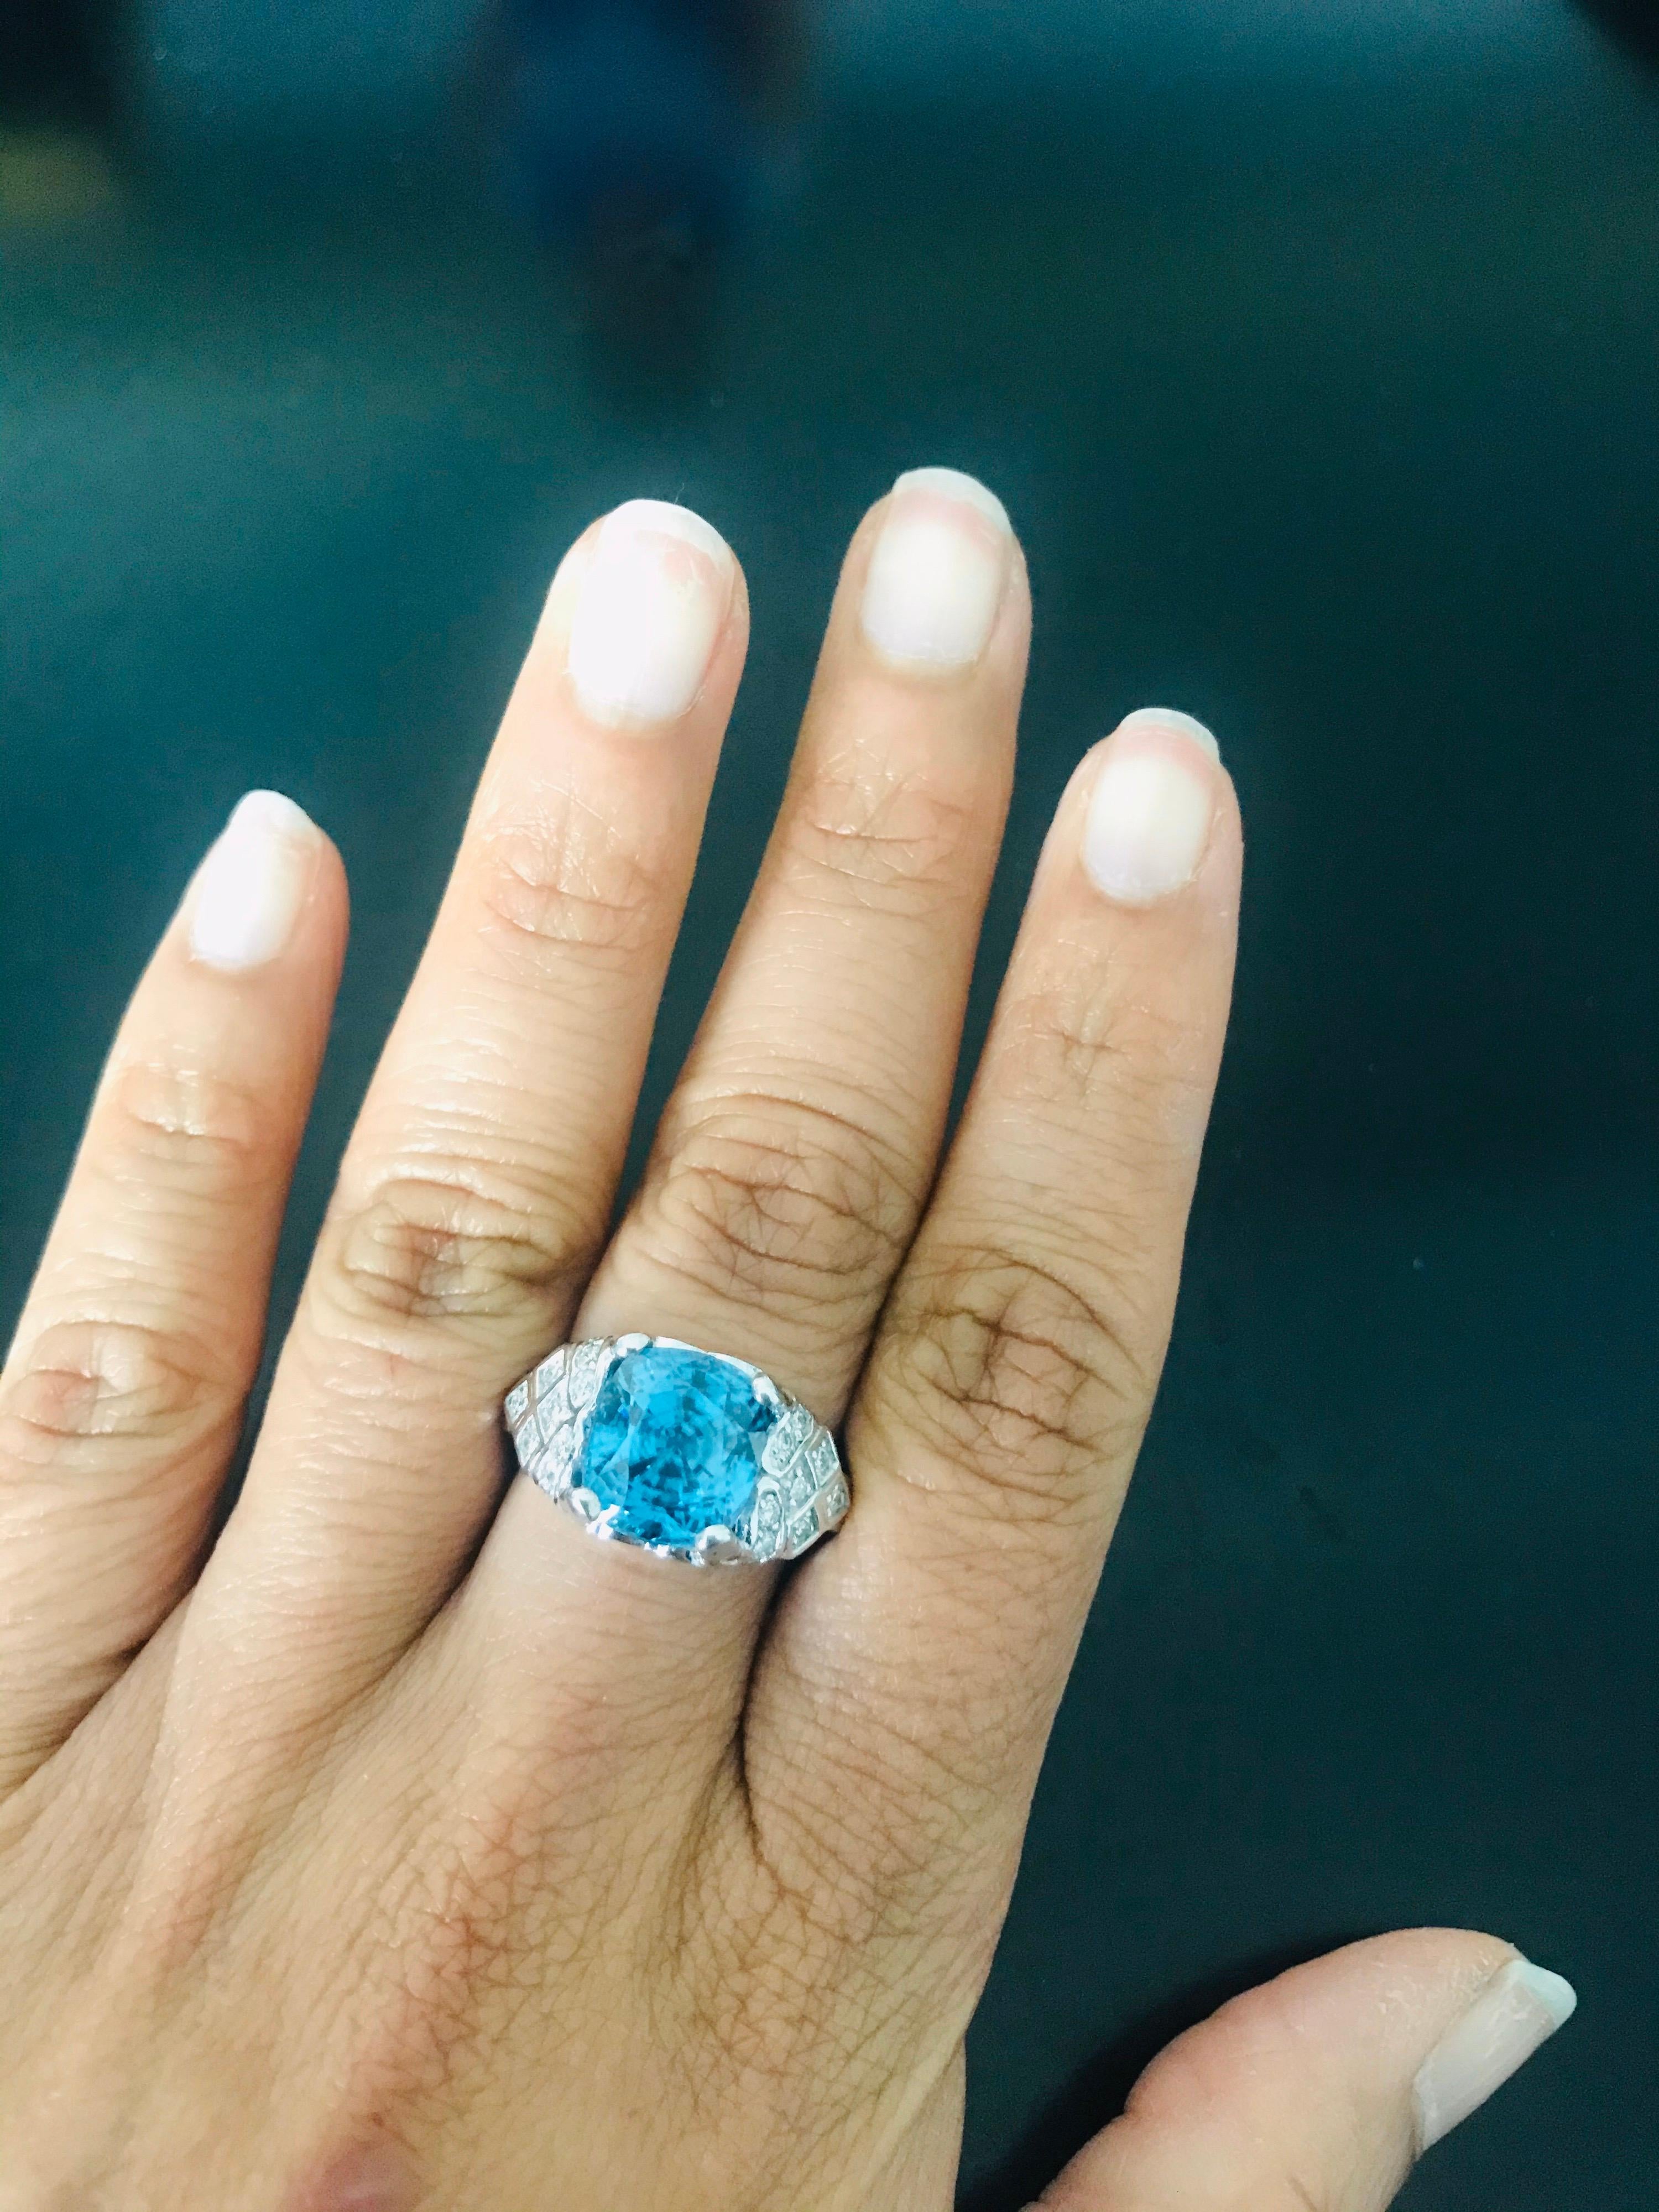 9.62 Carat Blue Zircon Diamond 14 Karat White Gold Ring In New Condition For Sale In Los Angeles, CA